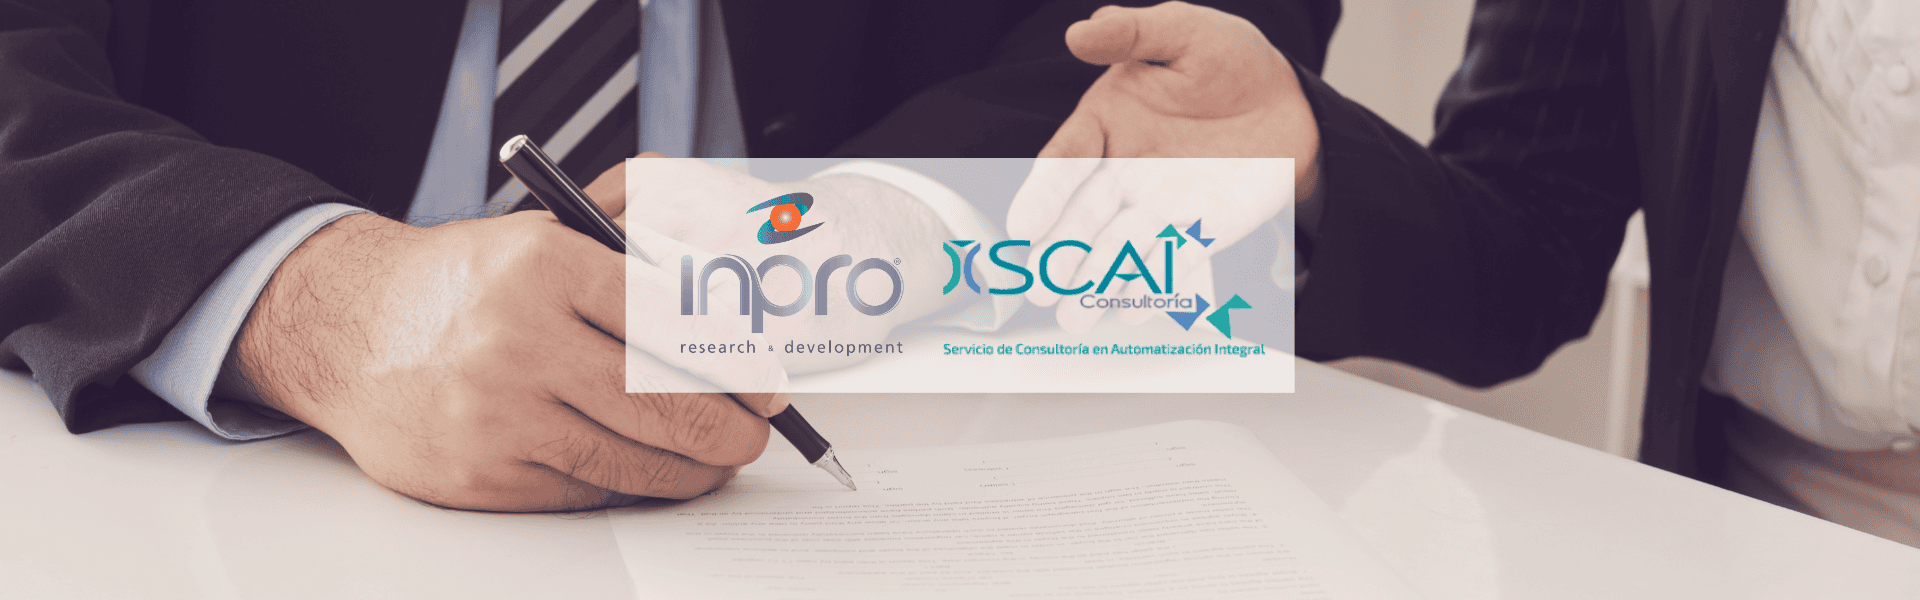 Inpro expands frontiers with its arrival in Mexico, thanks to the agreement with Scai Consultoría